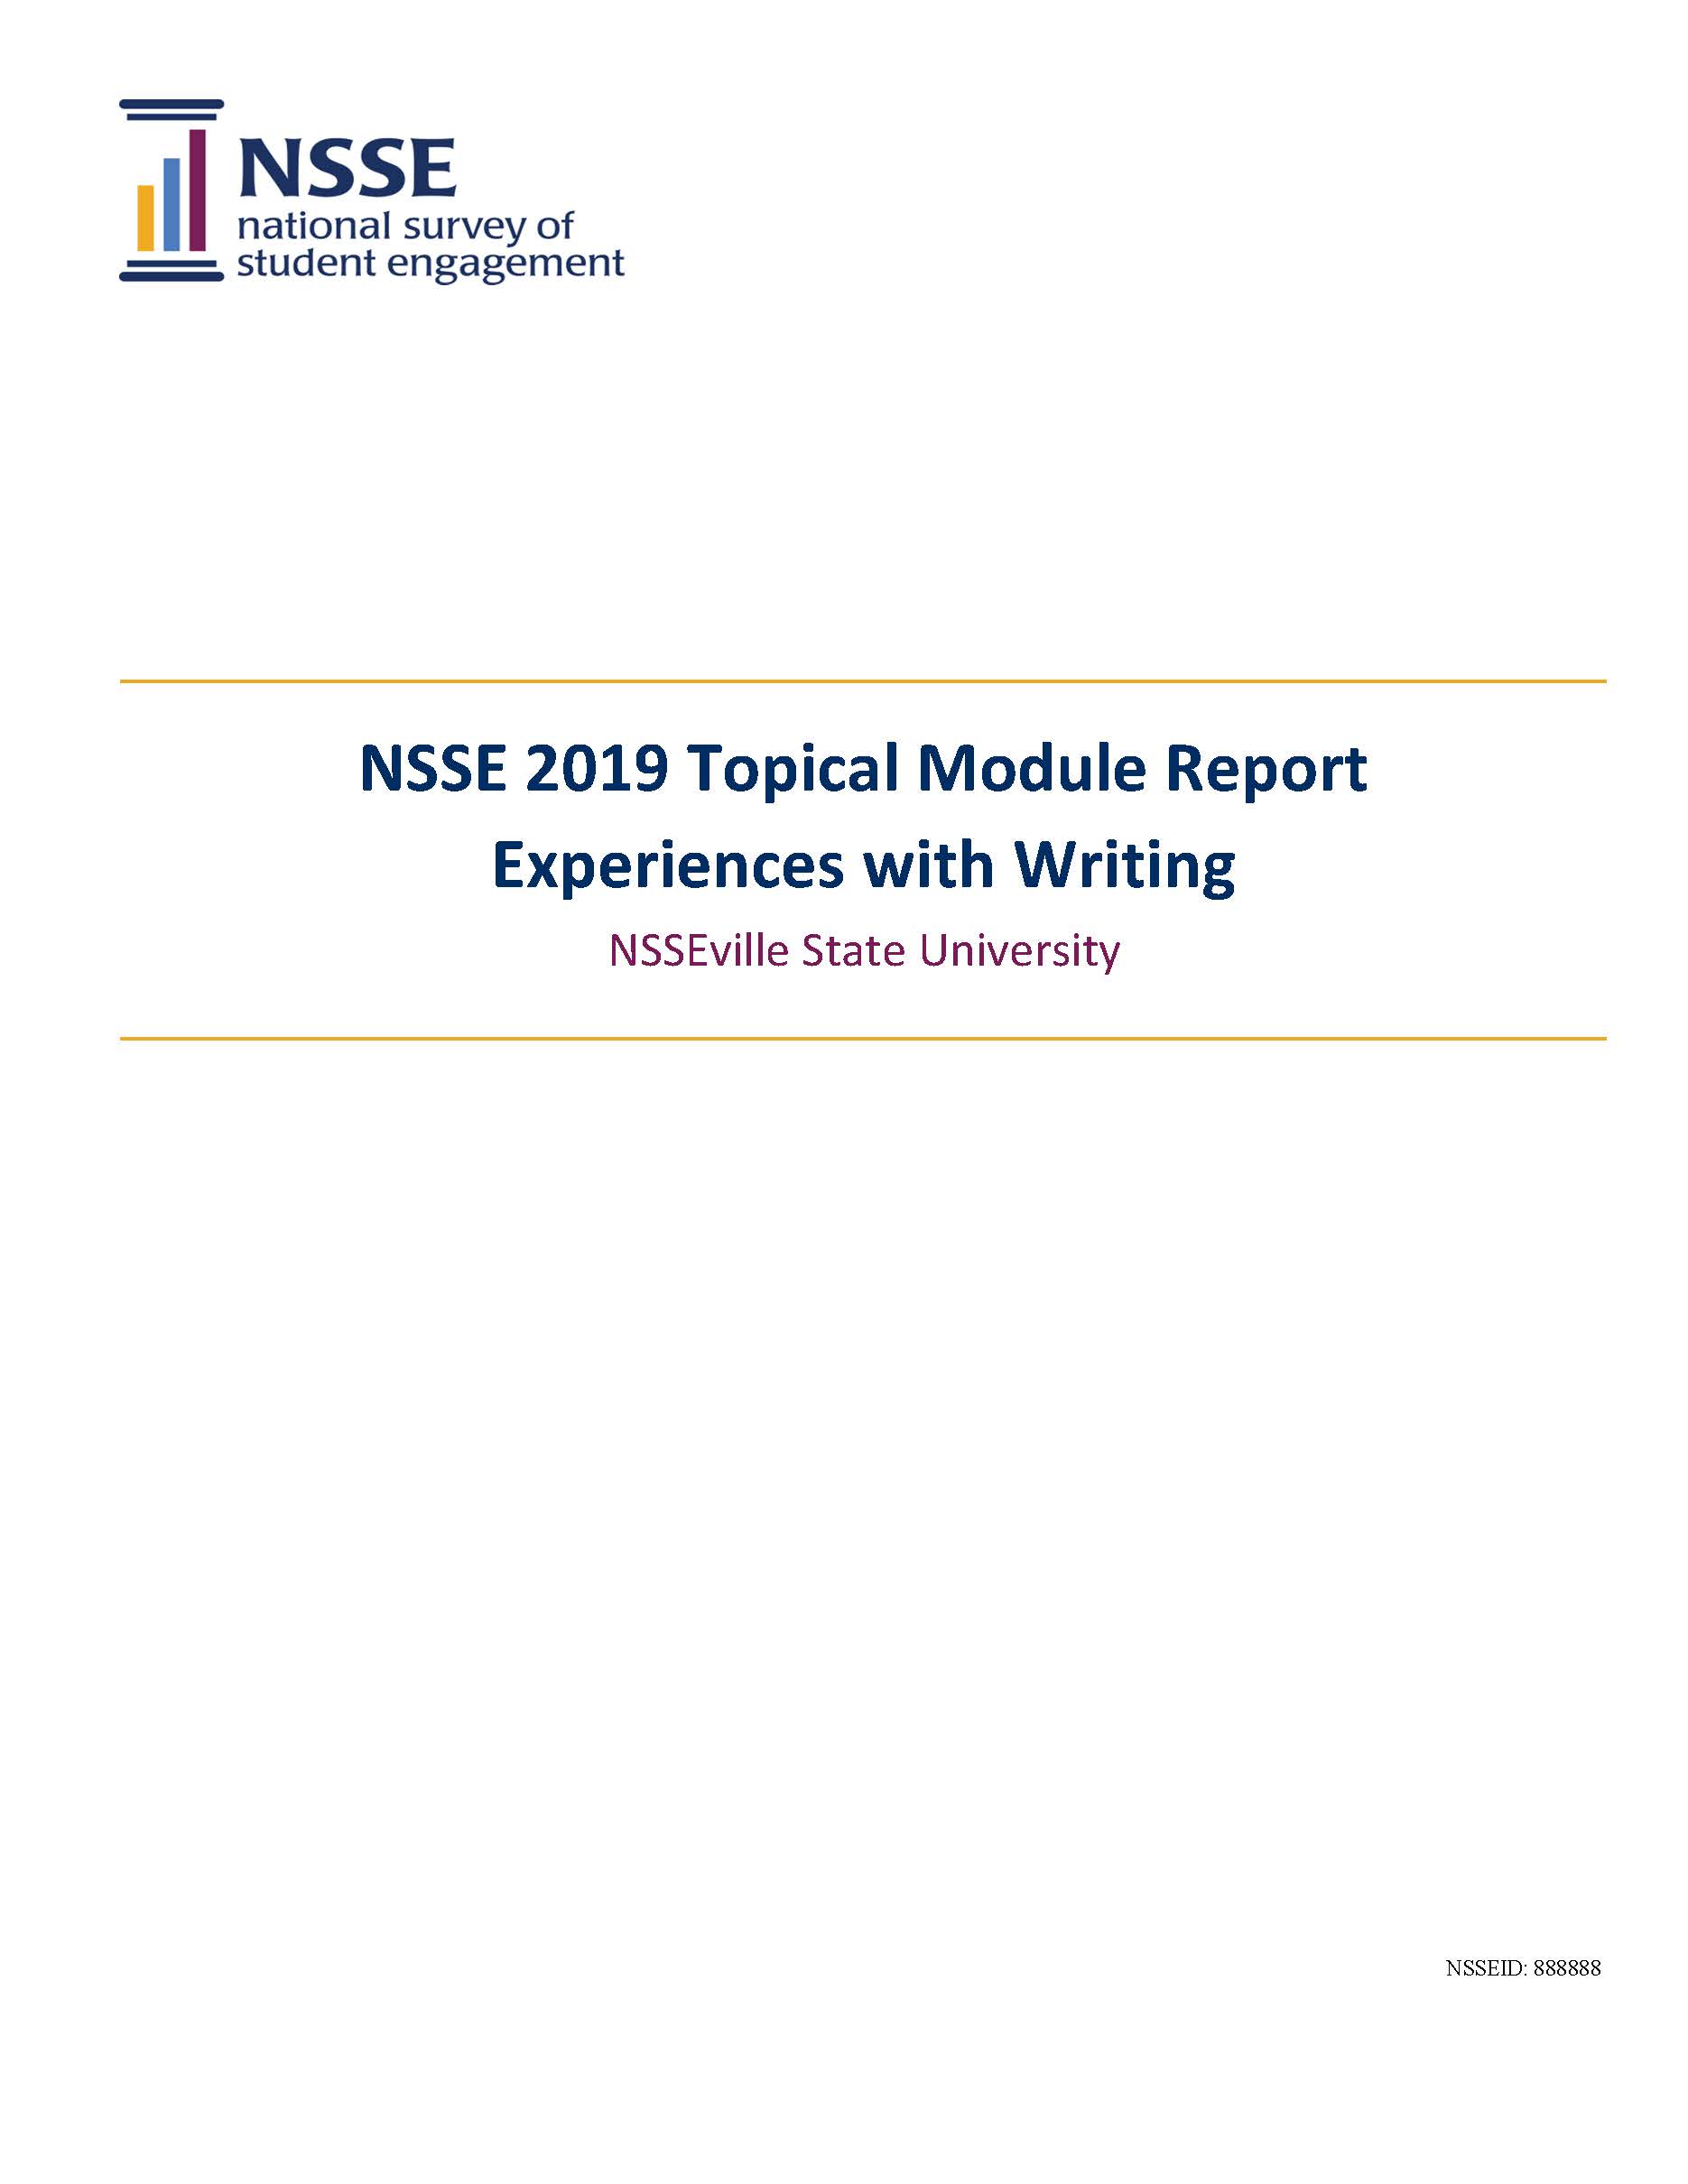 Sample Report: page 1 of NSSE Topical Module/Consortium report